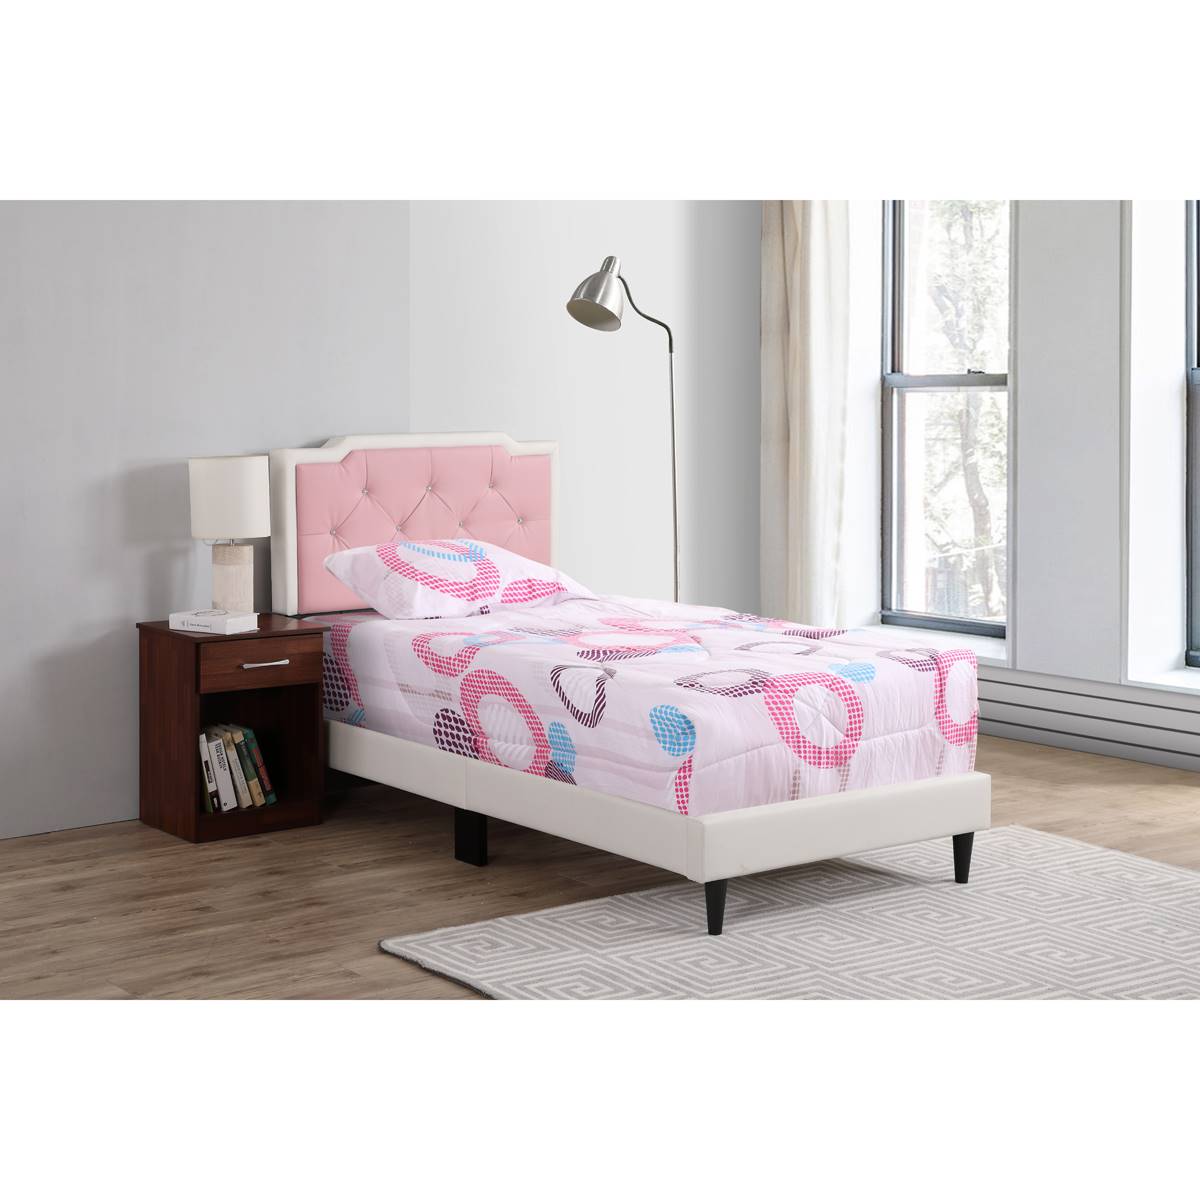 Passion Furniture Deb Jewel Tufted Panel Bed Frame - Twin